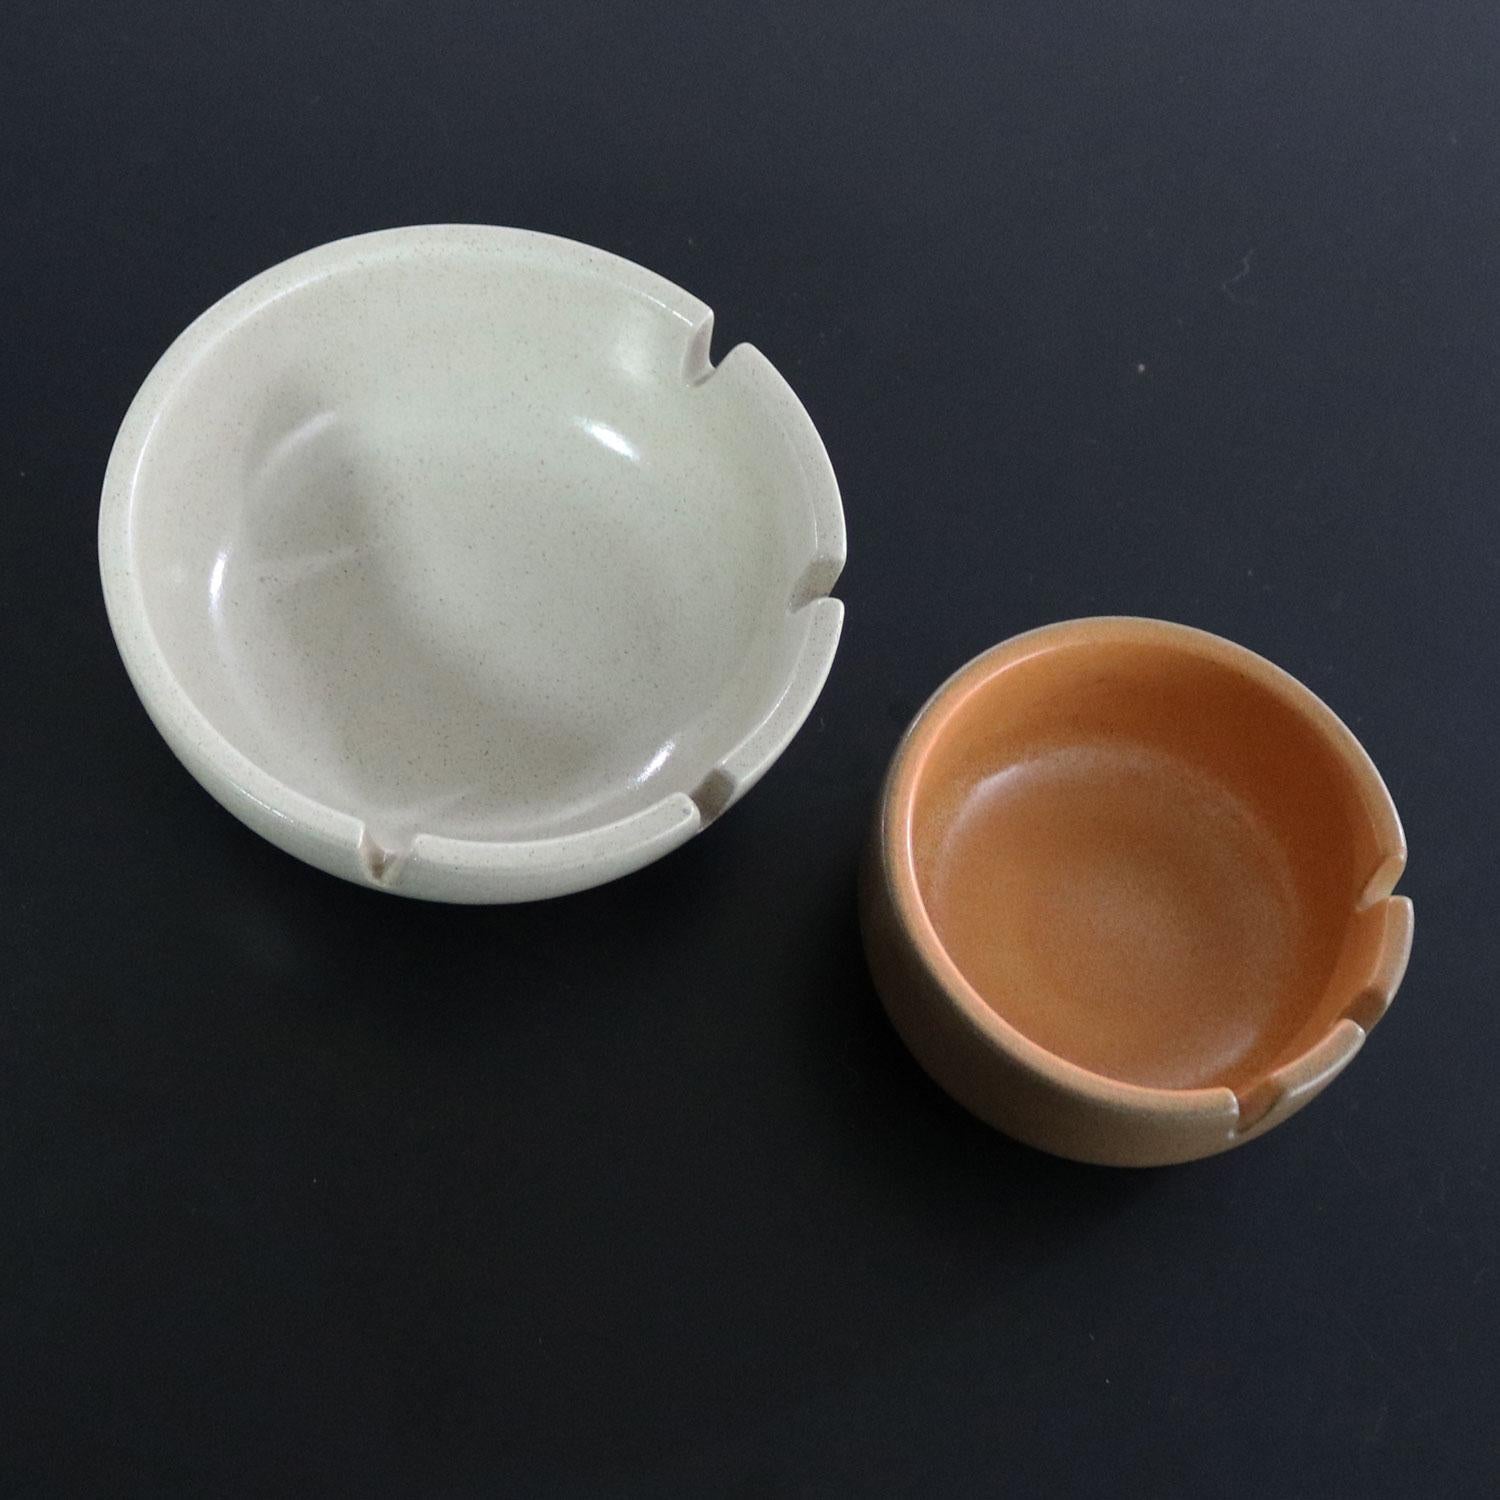 Handsome Mid-Century Modern pair of ashtrays by Edith Heath for Heath Ceramics. They are both in fabulous vintage condition with no chips, cracks, or chiggers. Please see photos, circa 1950-1953.

The ceramics and ceramic designs of Edith Heath